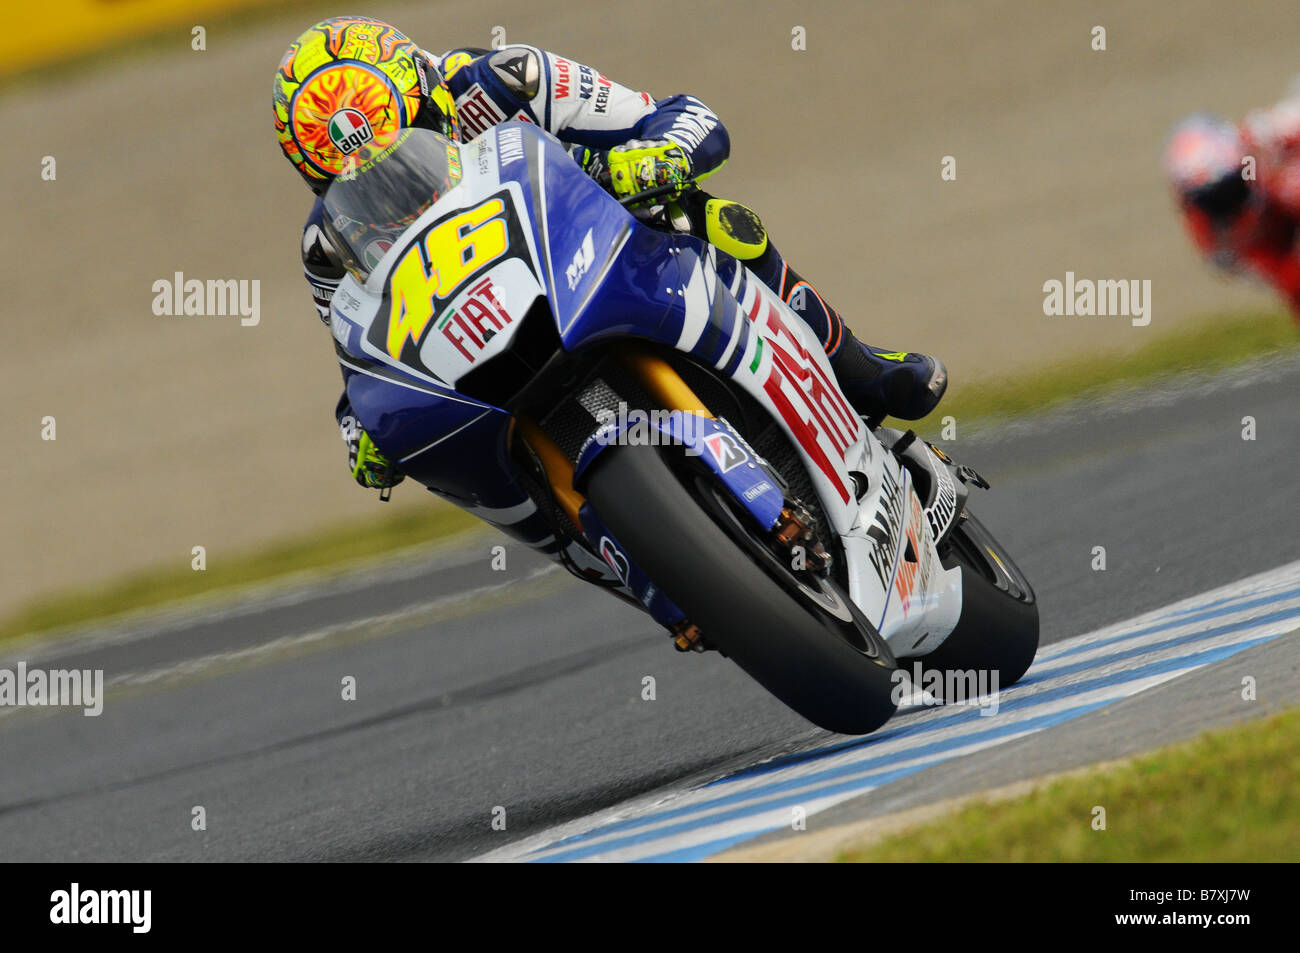 Valentino Rossi Fiat Yamaha SEPTEMBER 28 2008 Motor Valentino Rossi of Italy and the Fiat Yamaha team rides in action during Round 15 of the 2008 MotoGP World Championship the Japanese Grand Prix held at the Motegi Twin Ring circuit on September 28 2008 in Motegi Japan Photo by Masakazu Watanabe AFLO SPORT 0005 Stock Photo